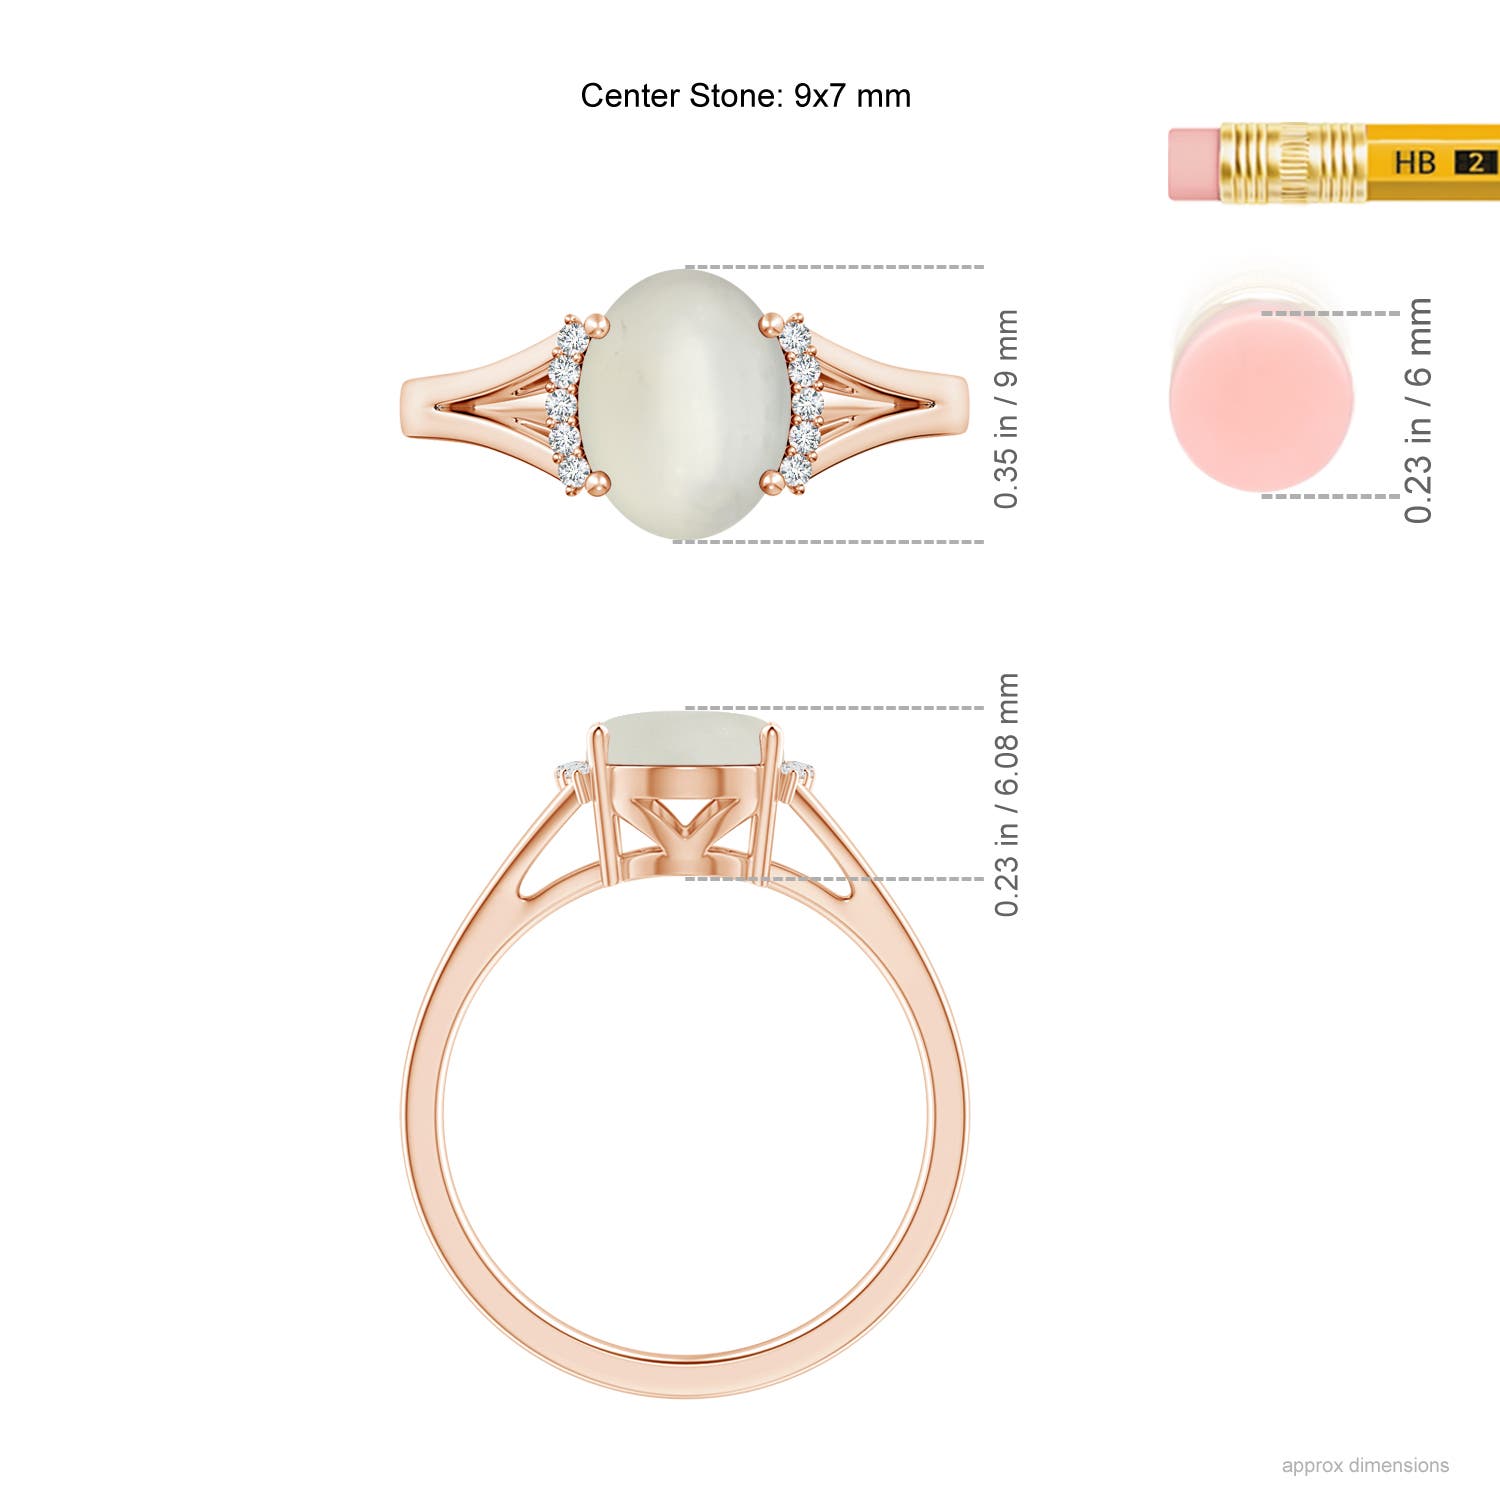 AAA - Moonstone / 1.77 CT / 14 KT Rose Gold